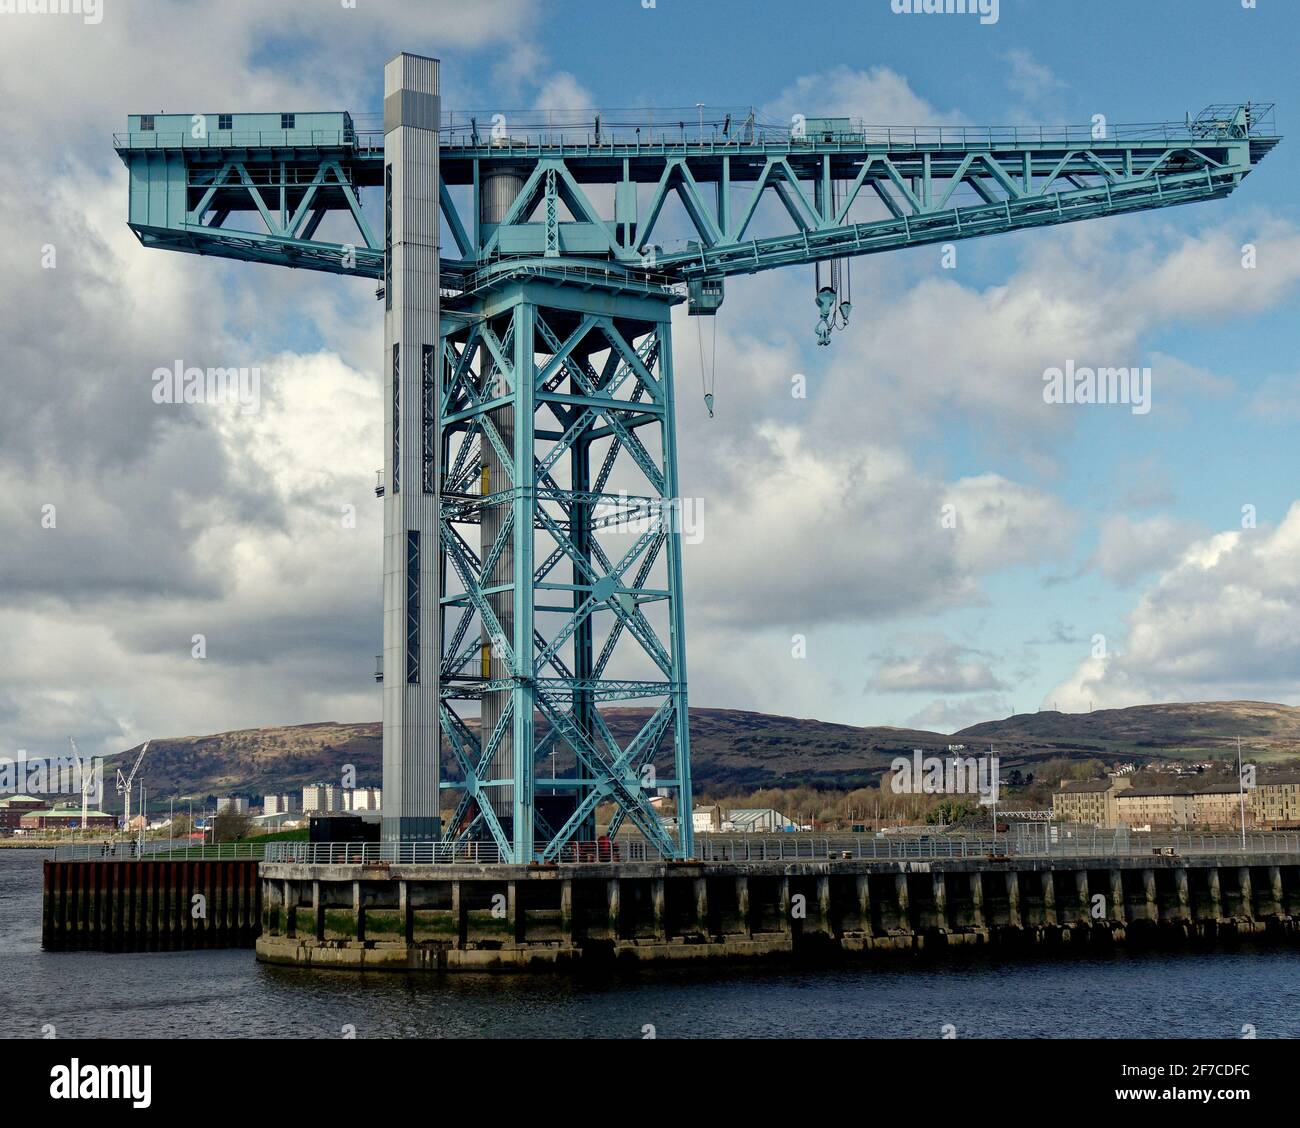 Clydebank, Glasgow, Scotland, UK. 6th  April, 2021. UK  Weather: Sunny Clyde Titan shipbuilding crane overlooking the slipway dock in the now leveled John Brown shipyard builders of the Queen Mary and Elizabeth cunard liners and HMS Hood. Credit: Gerard Ferry/Alamy Live News Stock Photo